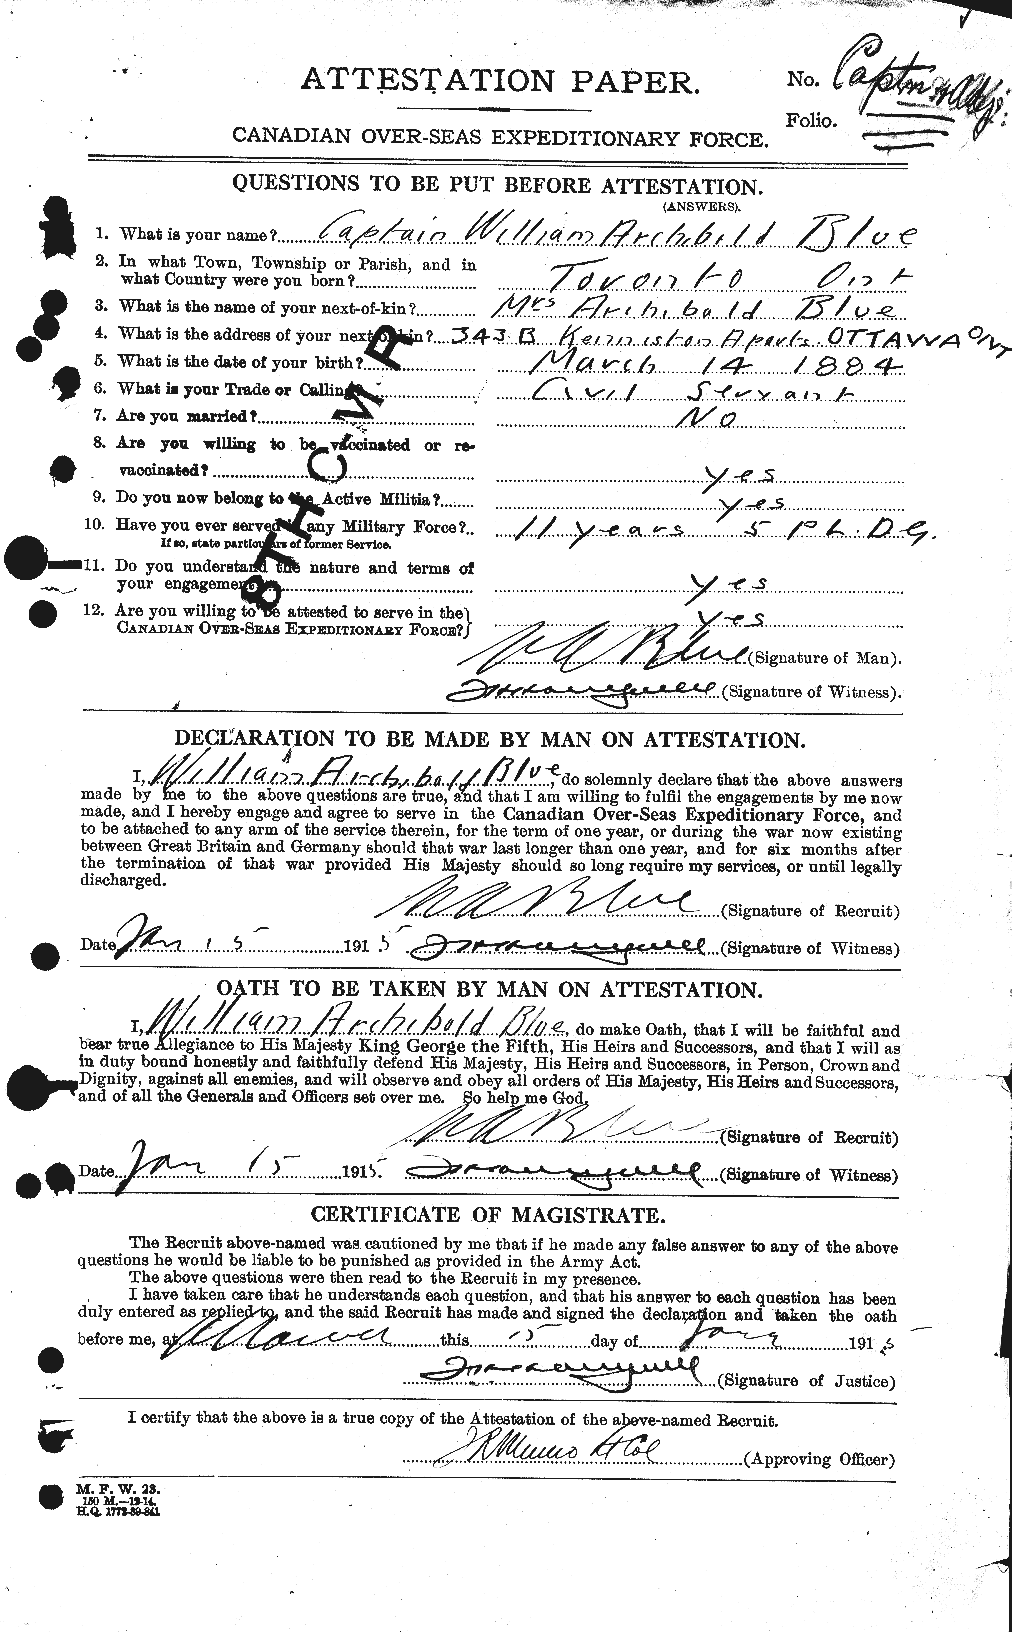 Personnel Records of the First World War - CEF 247157a